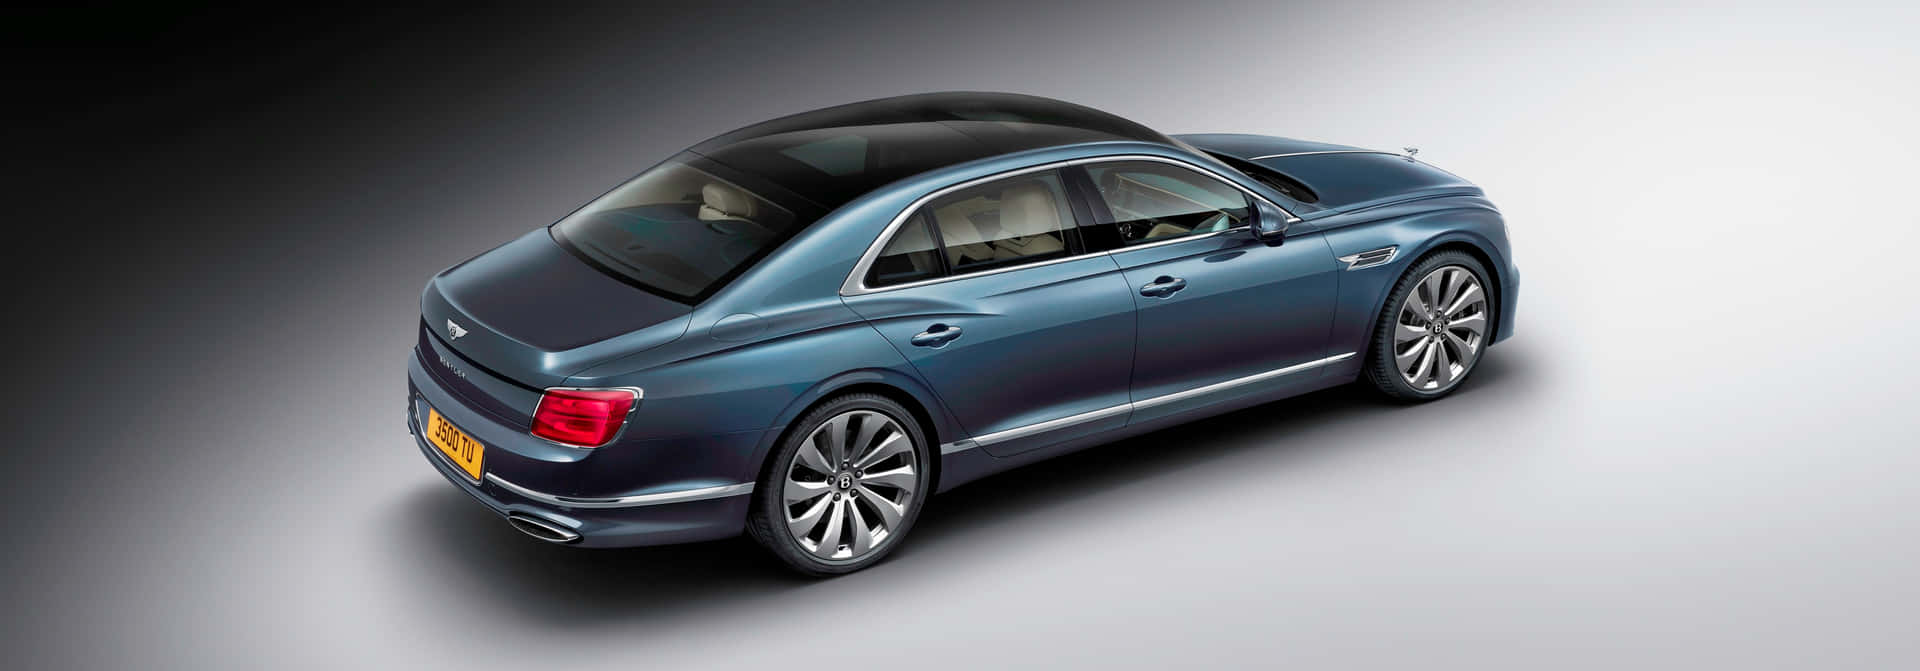 Experience Luxury with the Bentley Flying Spur Wallpaper